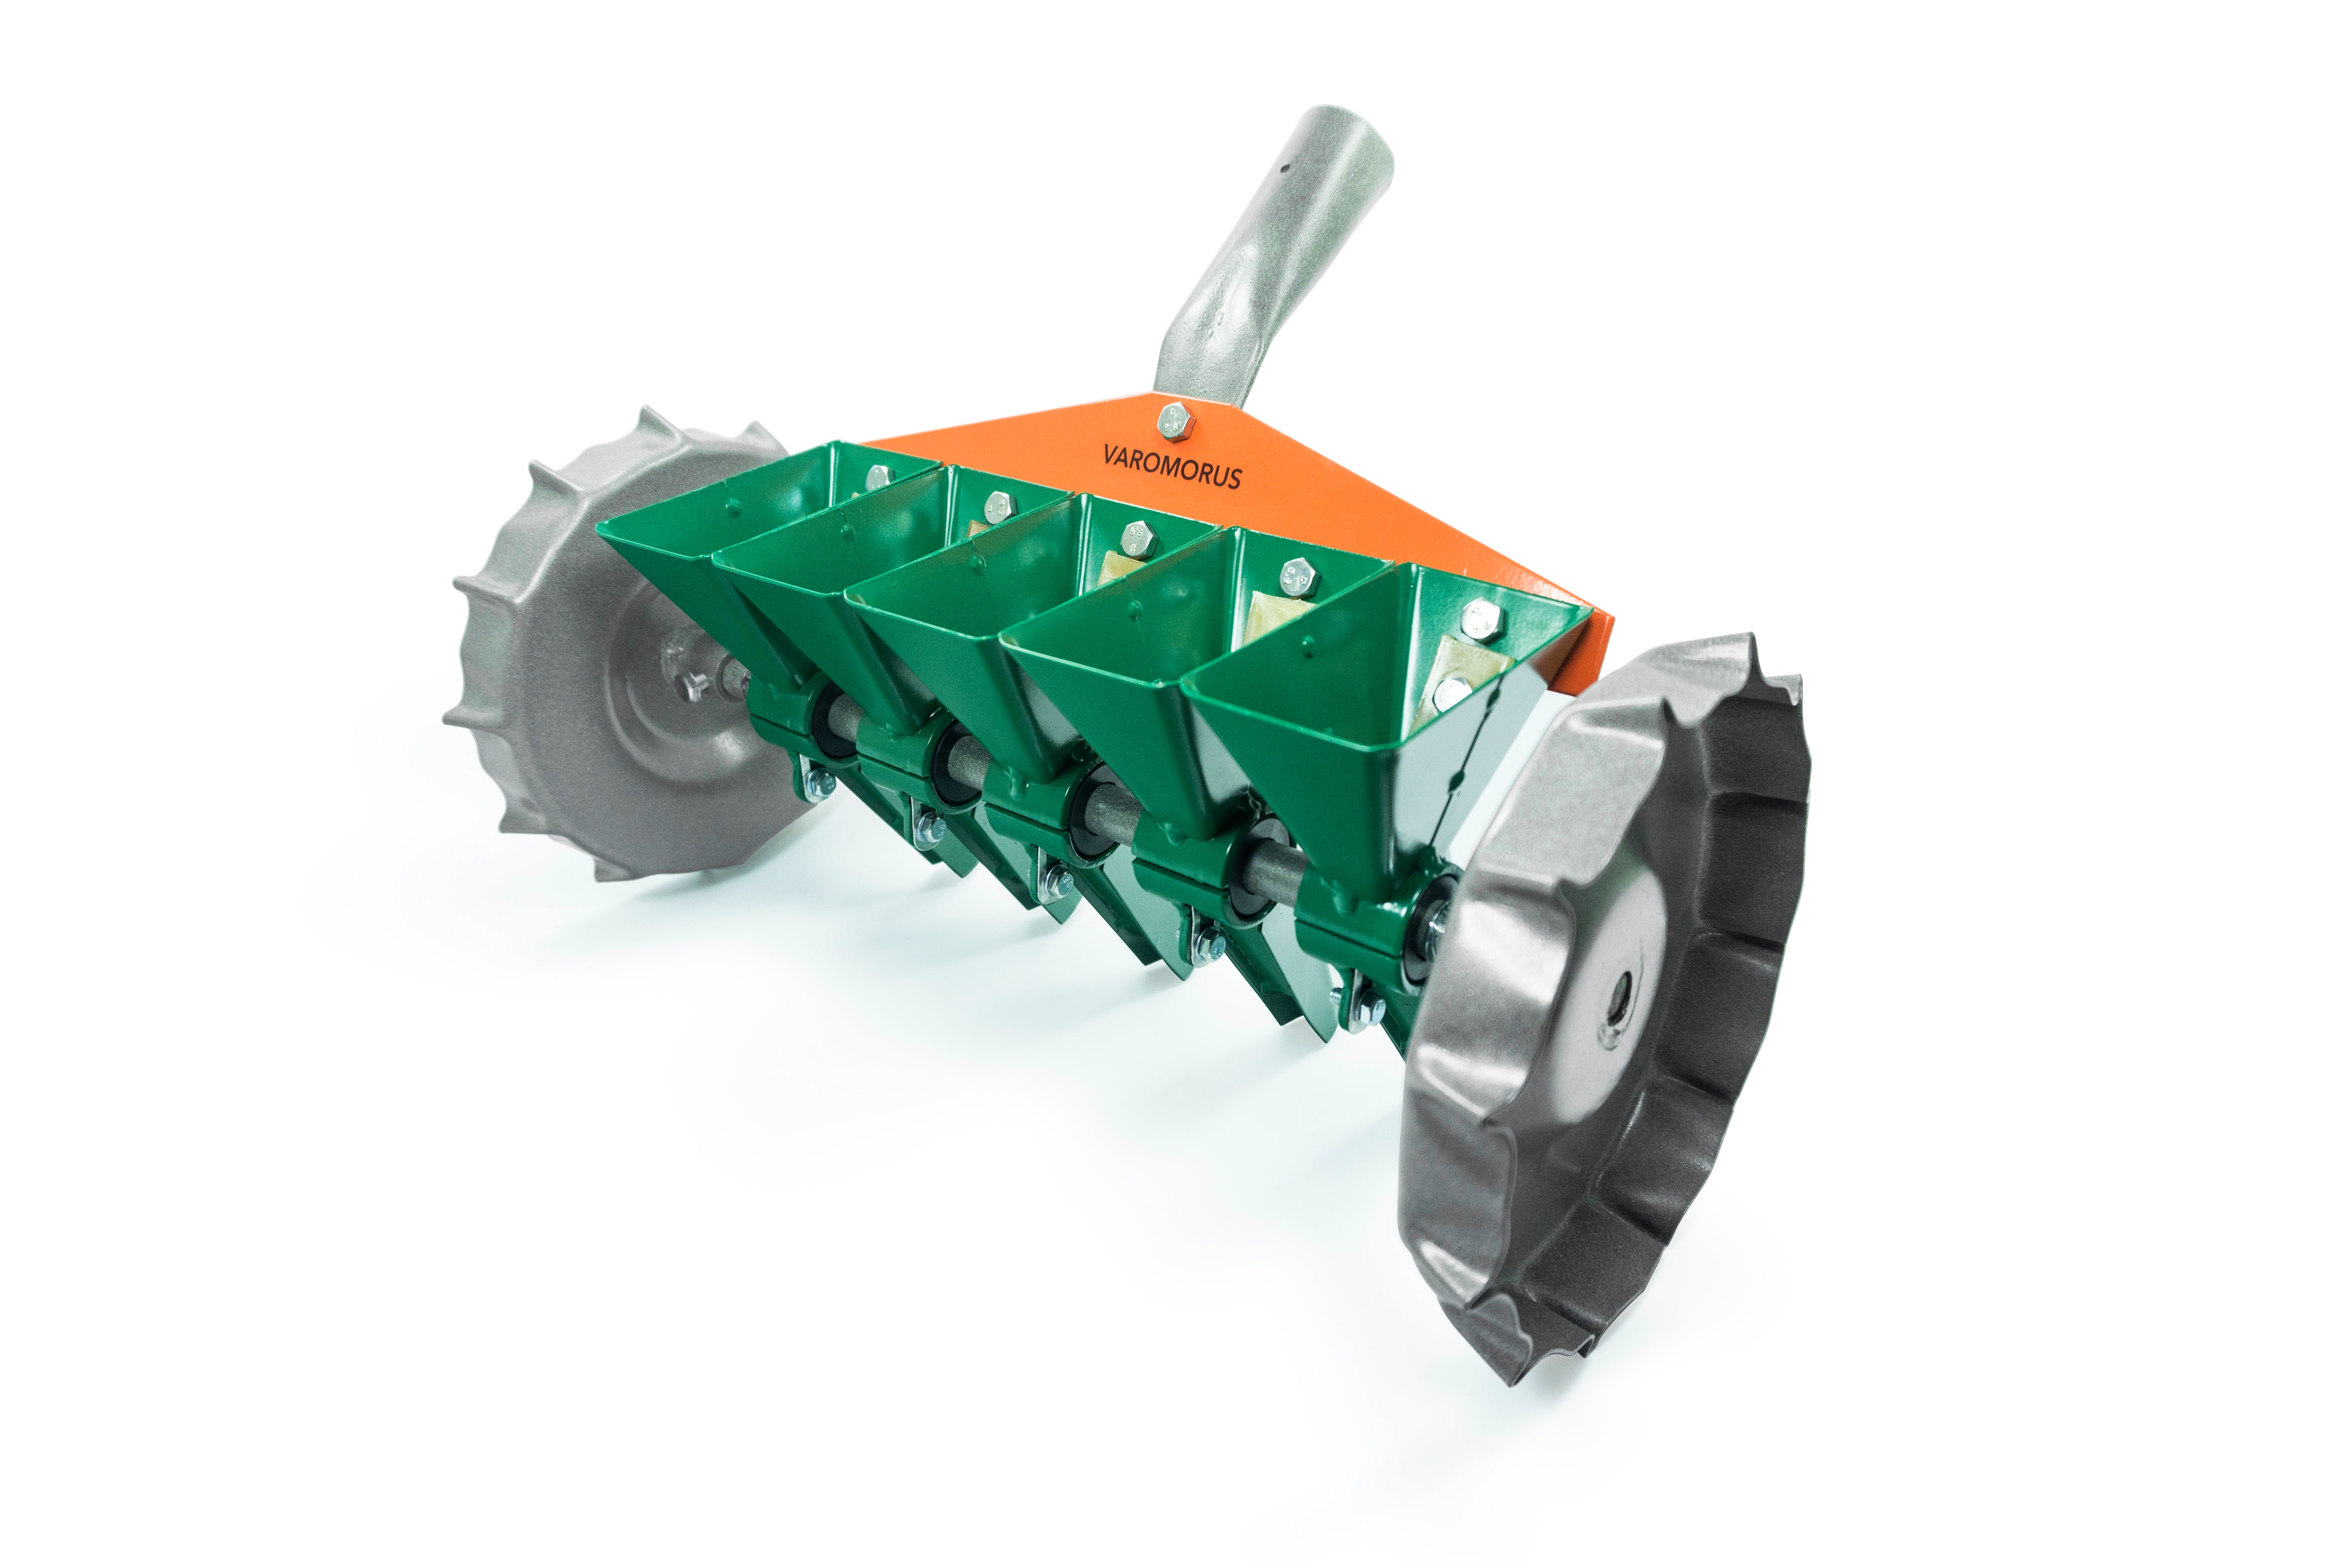 Vegetable Seed Sowing Machine, An Agricultural Machine which